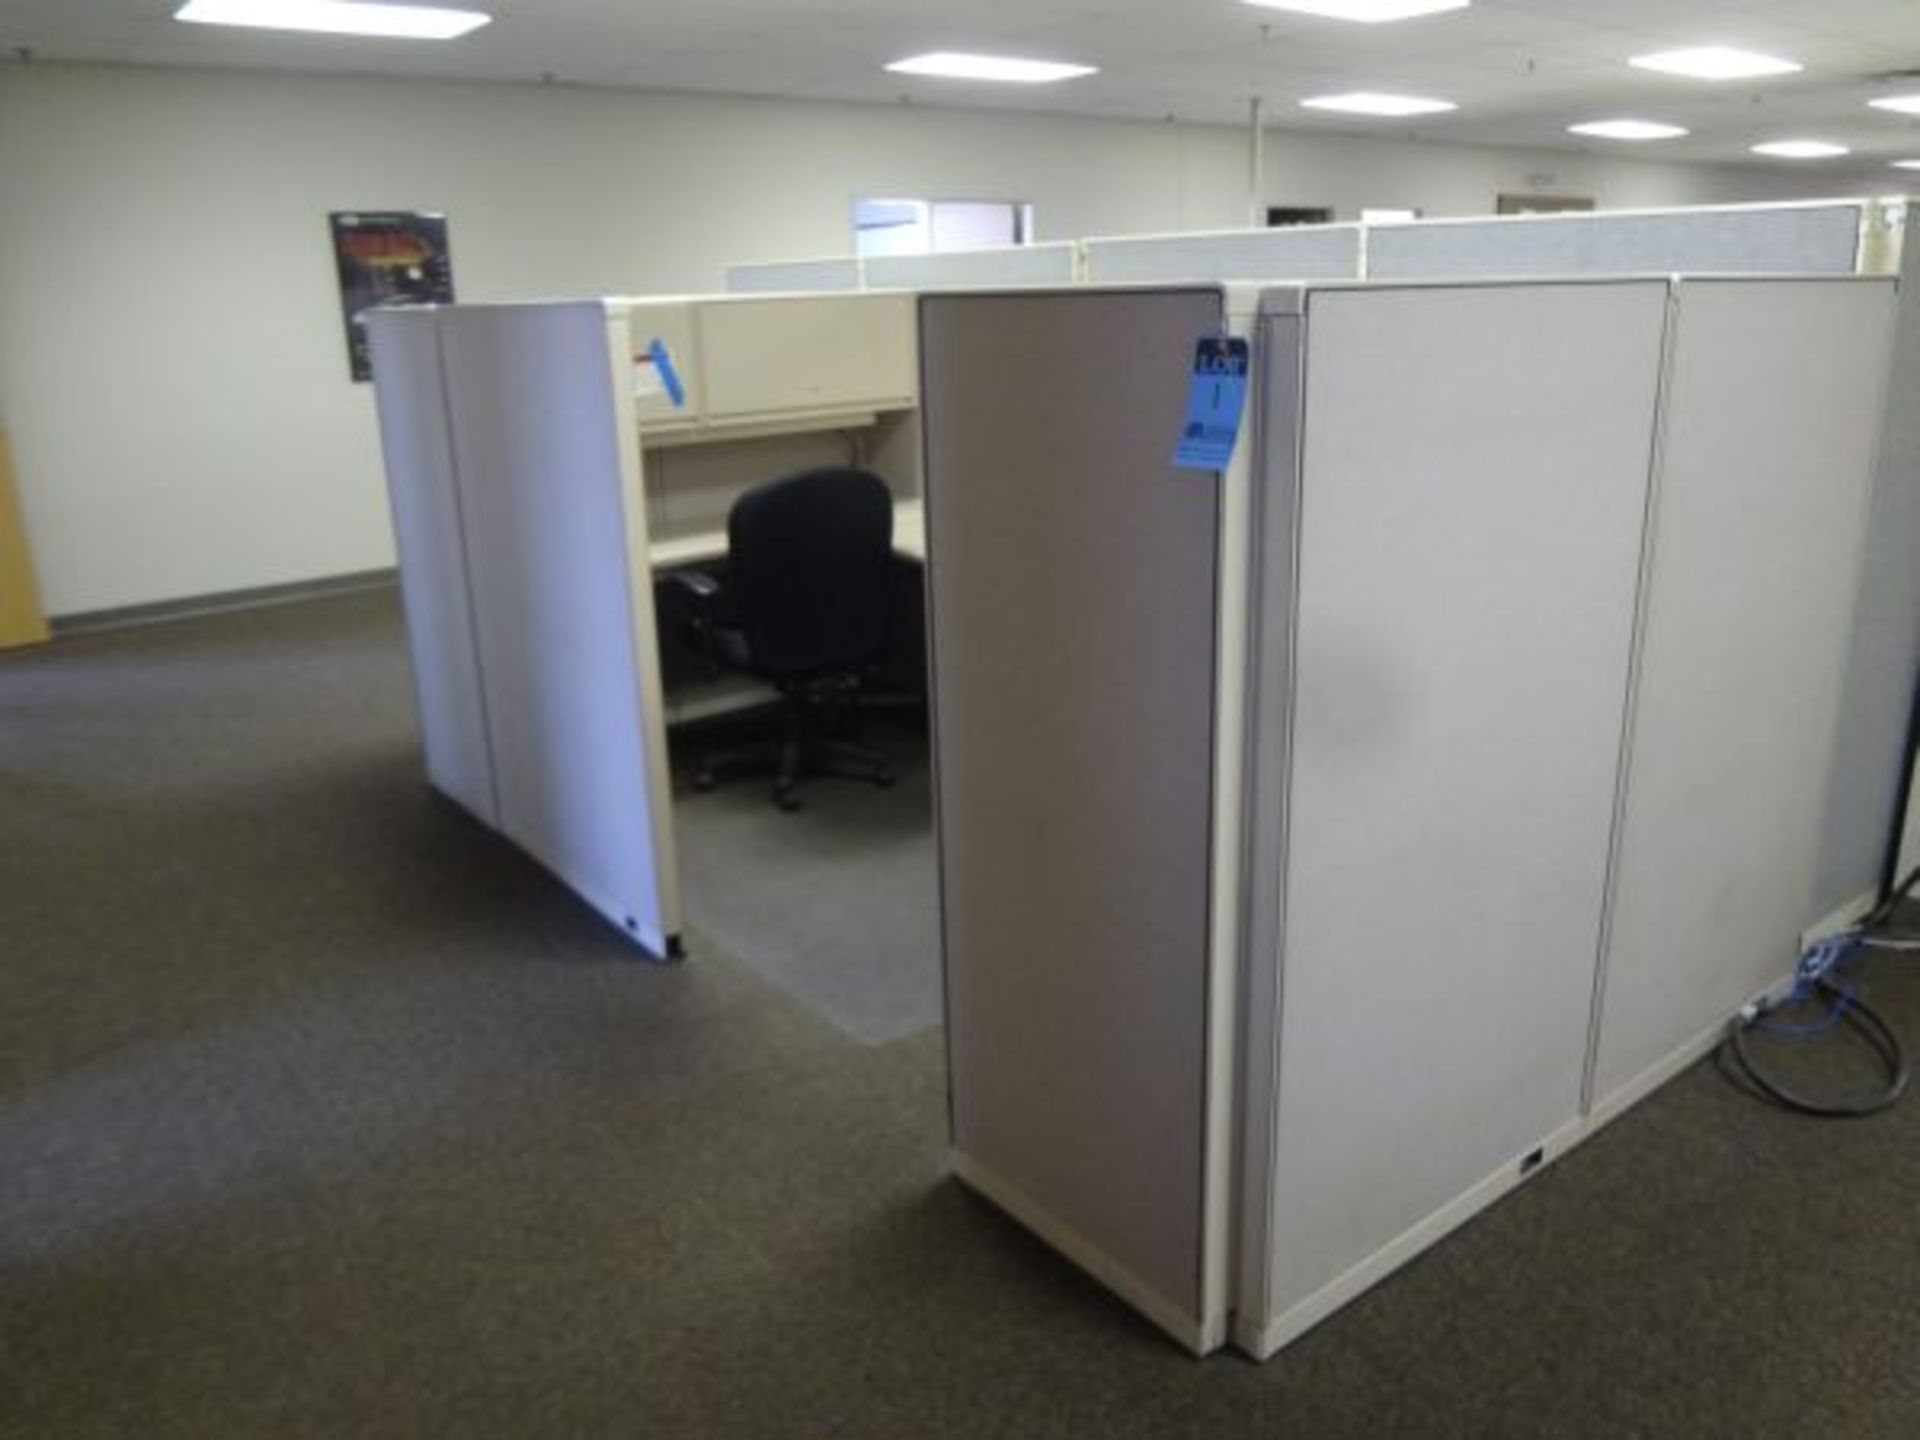 75" X 144" X 61" TWO-PERSON STEELCASE MODULAR OFFICE INCLUDING (4) OVERHEAD CABINETS, (2) 2-DRAWER